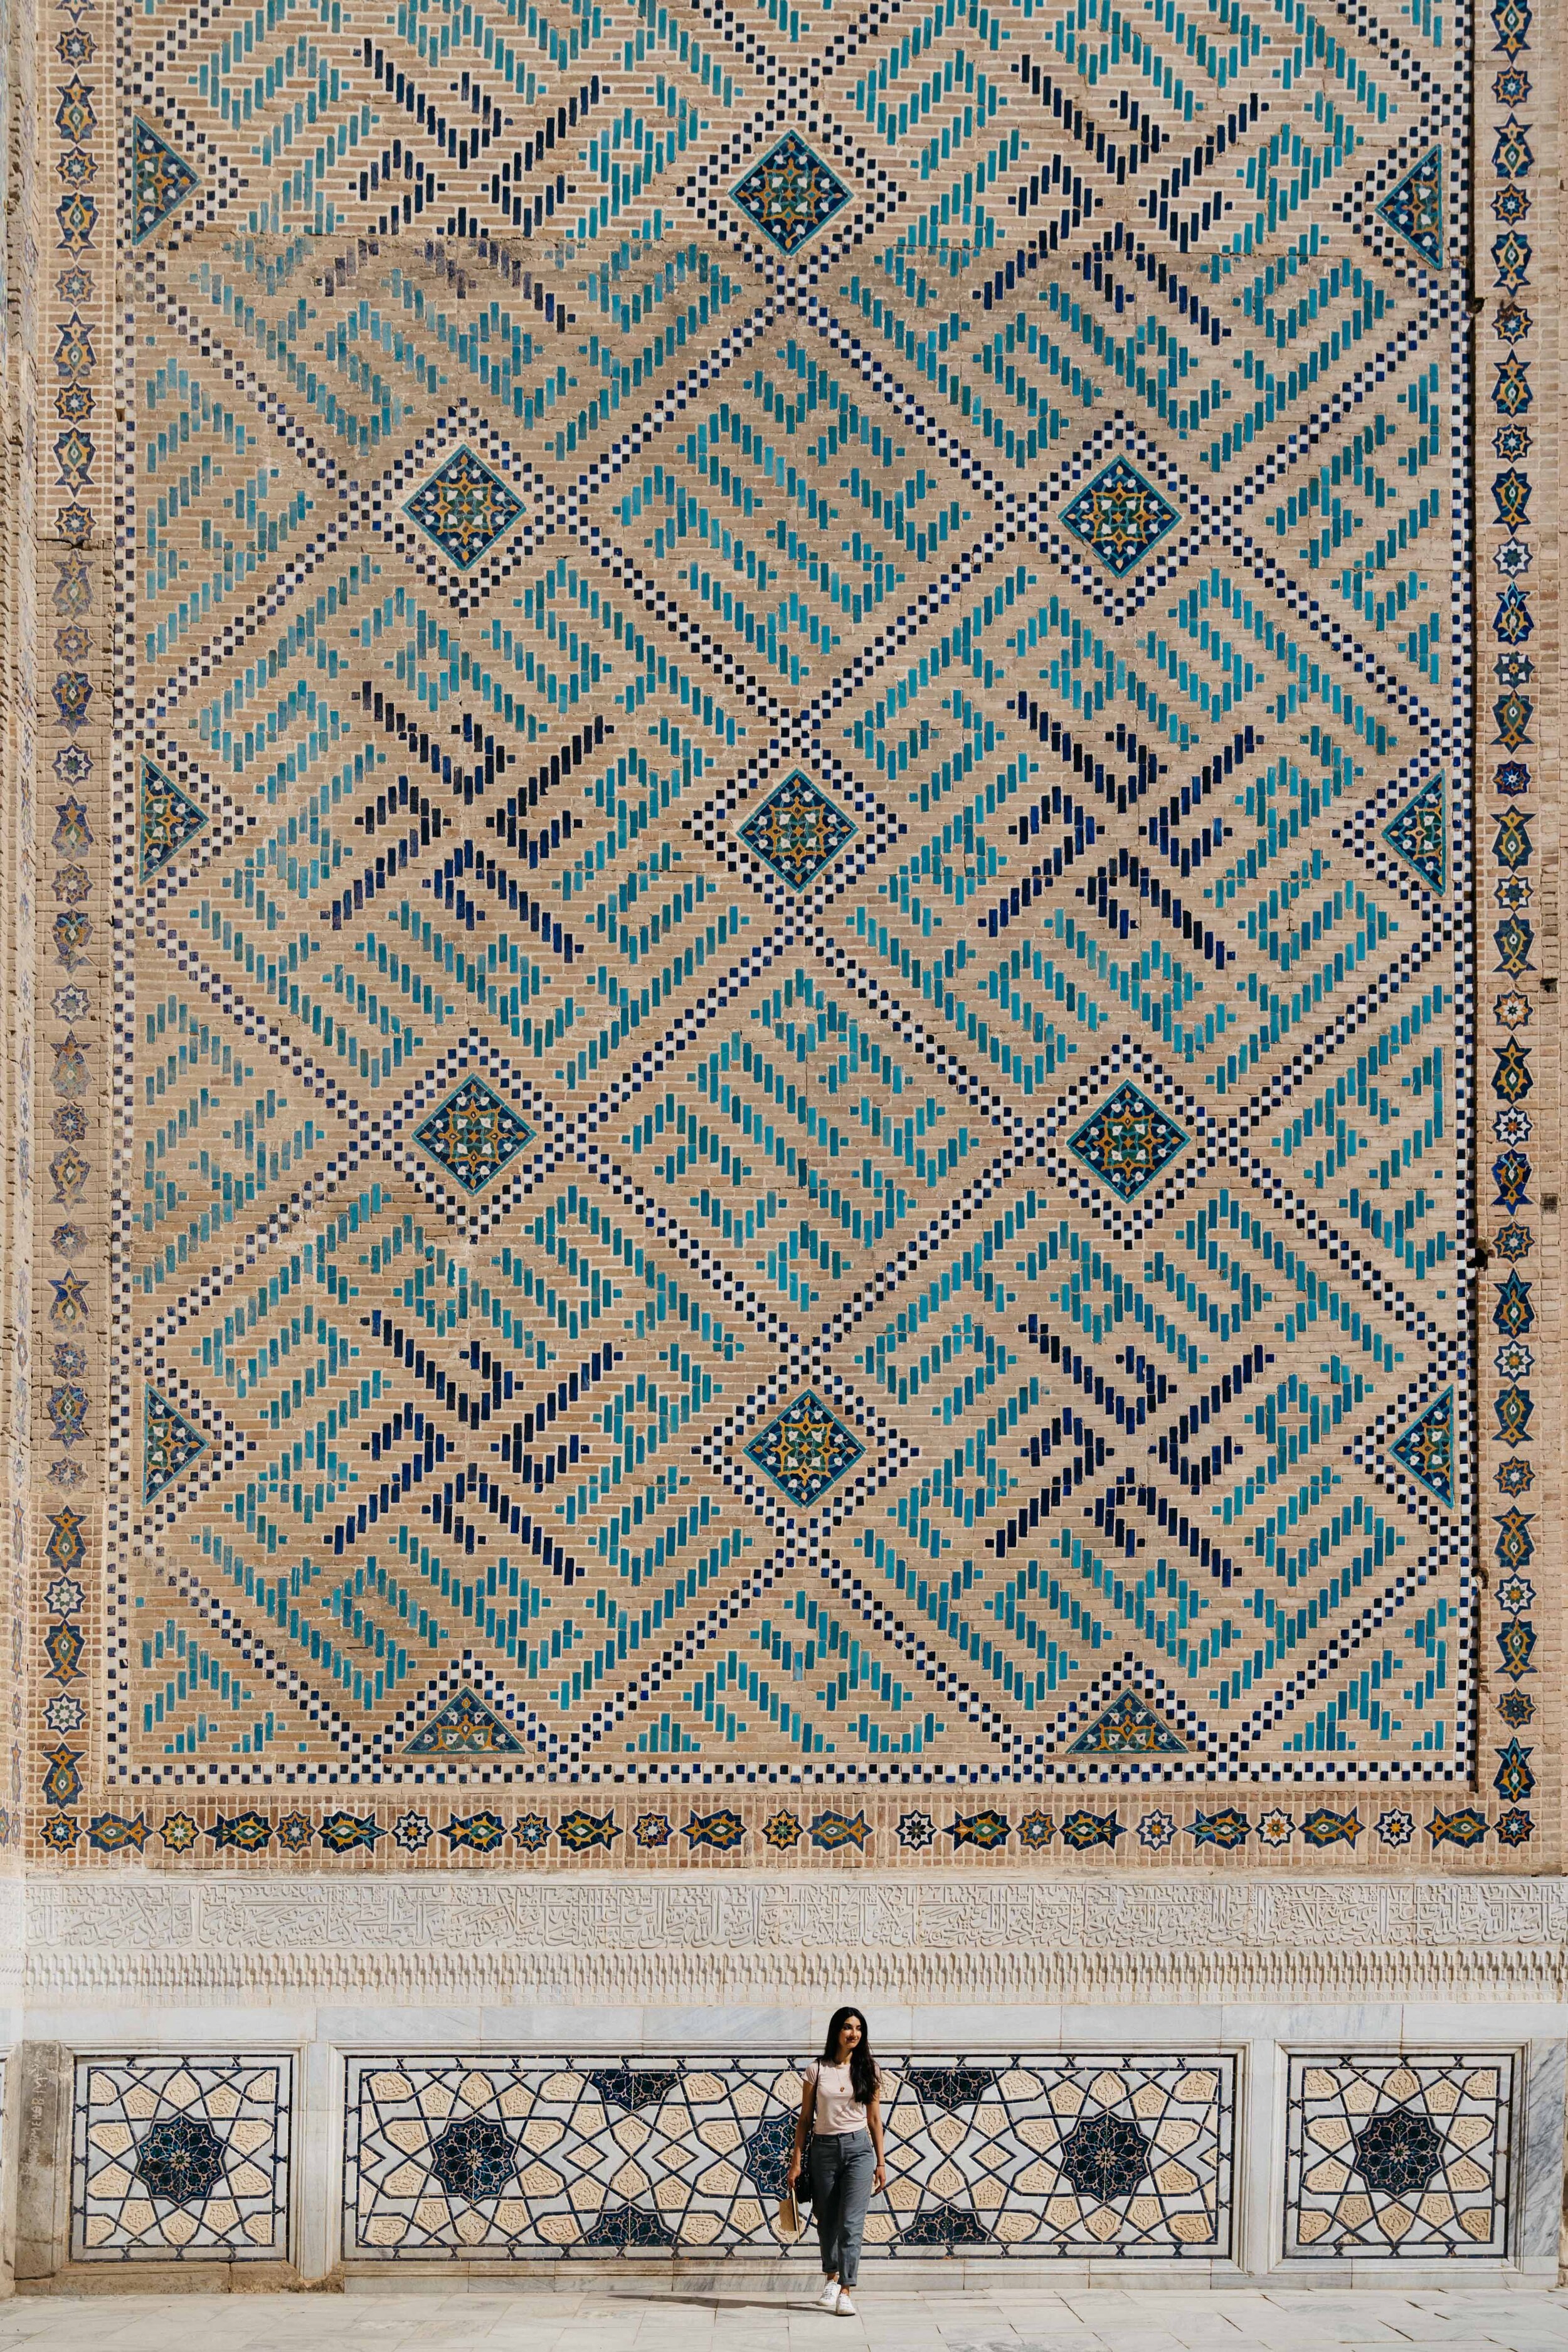  Inside the main iwan. Kufic calligraphy made up of blue and turquoise tiles decorates the surface. The calligraphy repeatedly spells out the names Allah, Mohammed and Ali. 